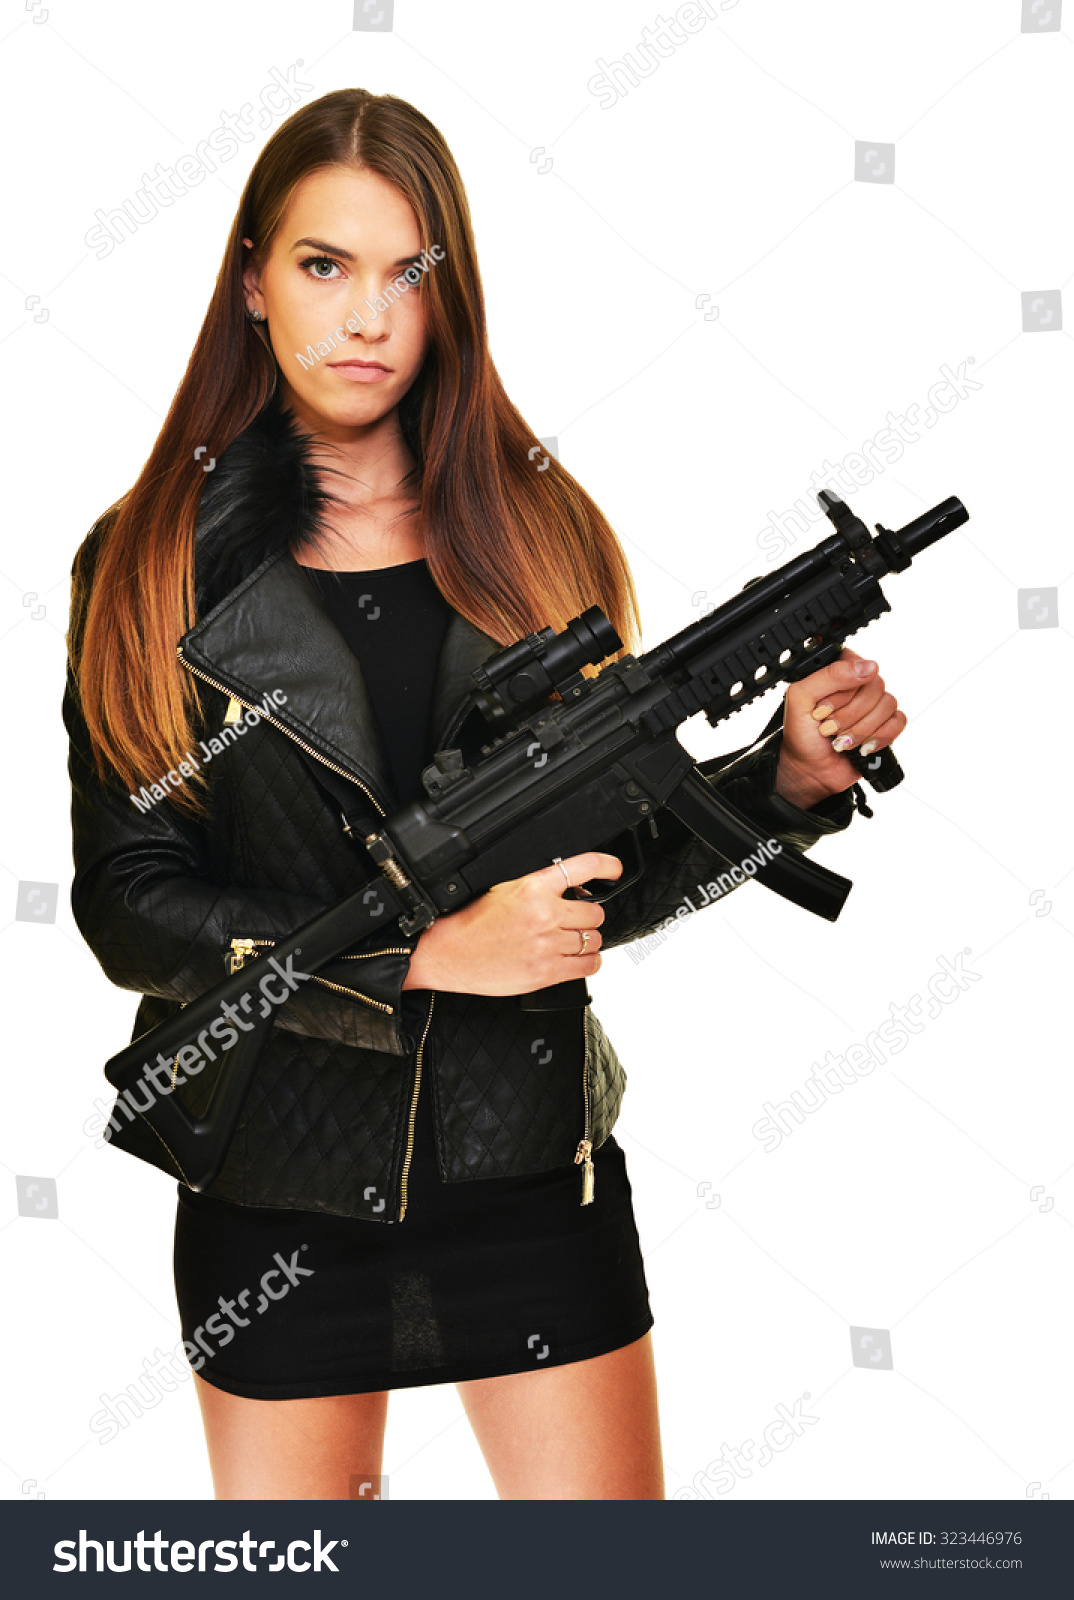 Sexy Woman With Gun 22